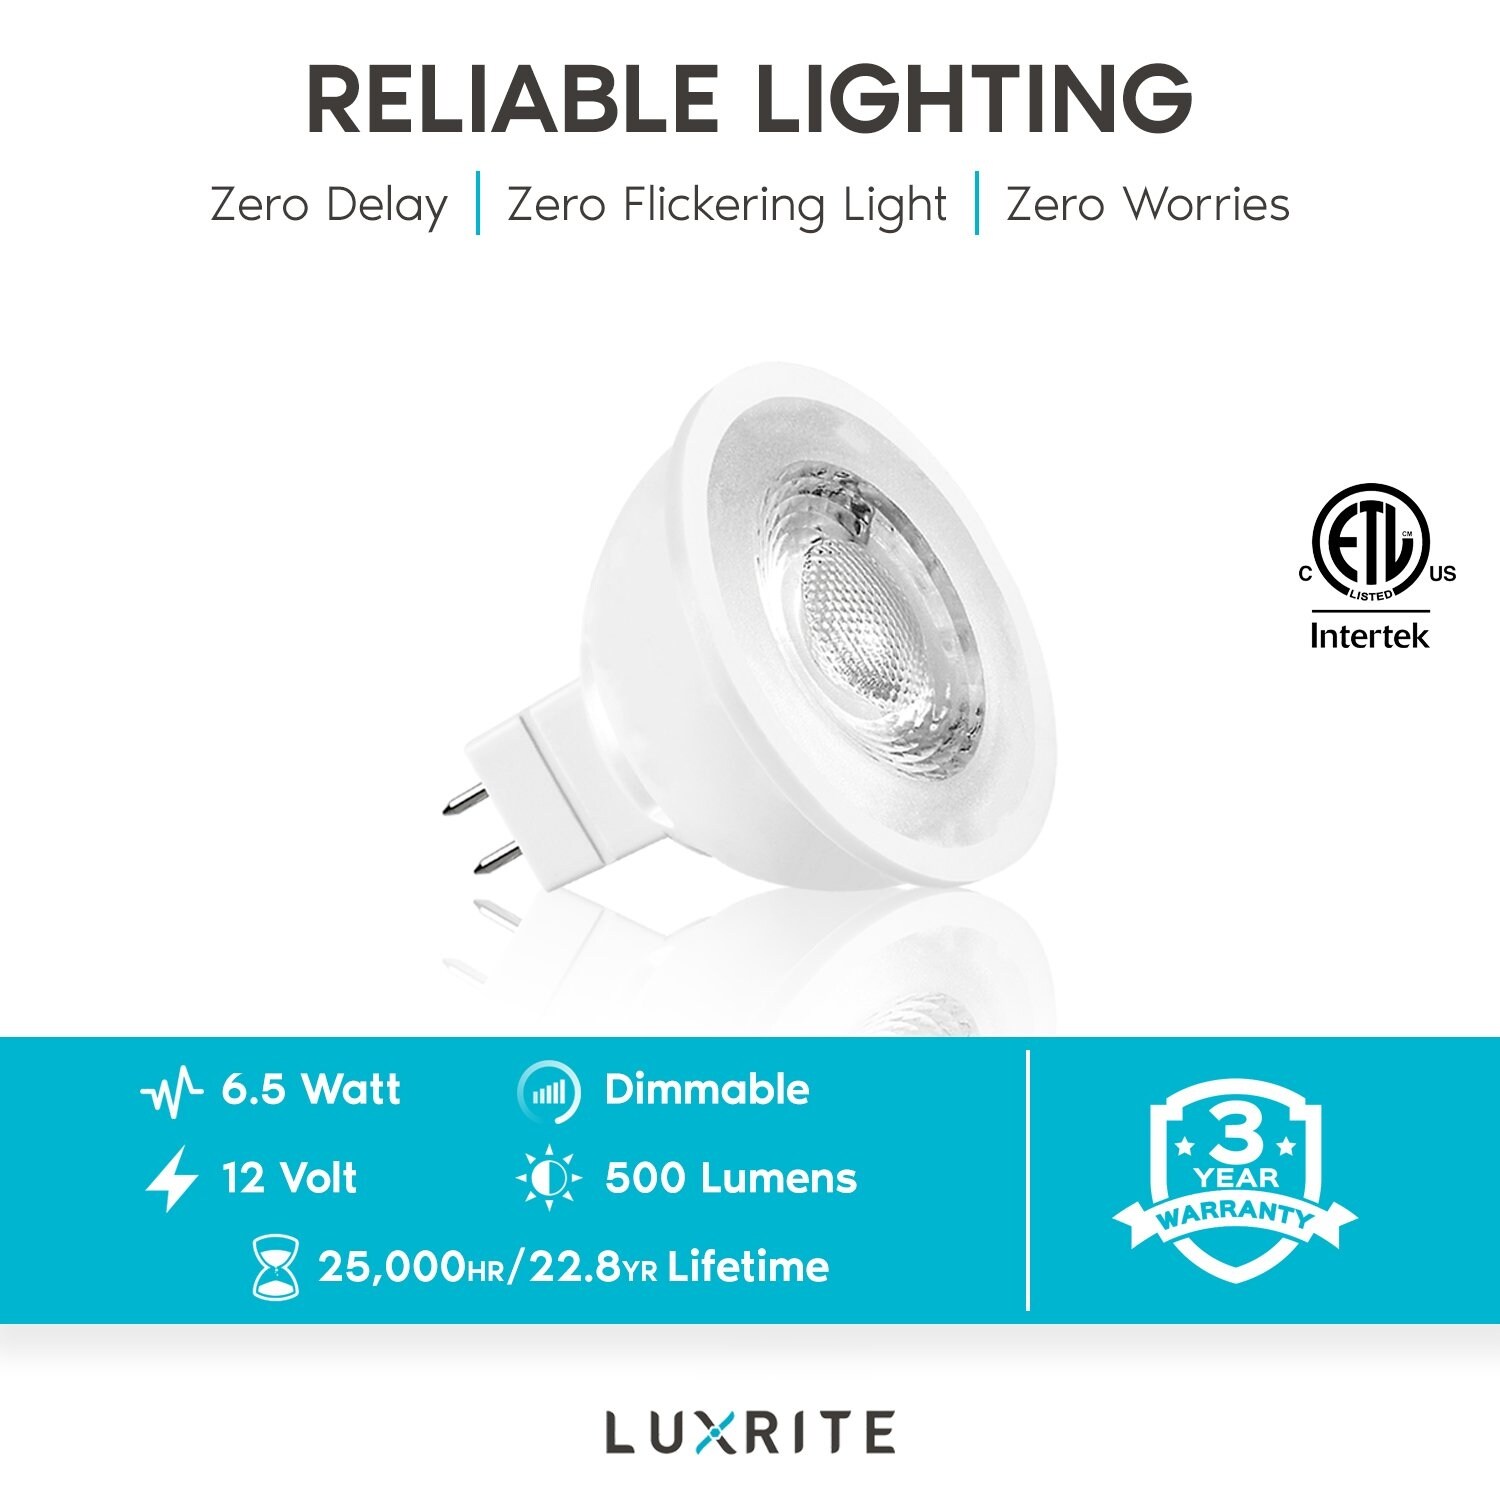 Luxrite MR16 LED Bulb 50W Equivalent, 12V, Dimmable, 500 Lumens, GU5.3 LED  Bulb 6.5W, Enclosed Fixture Rated (24 Pack) - On Sale - Bed Bath & Beyond -  31860222